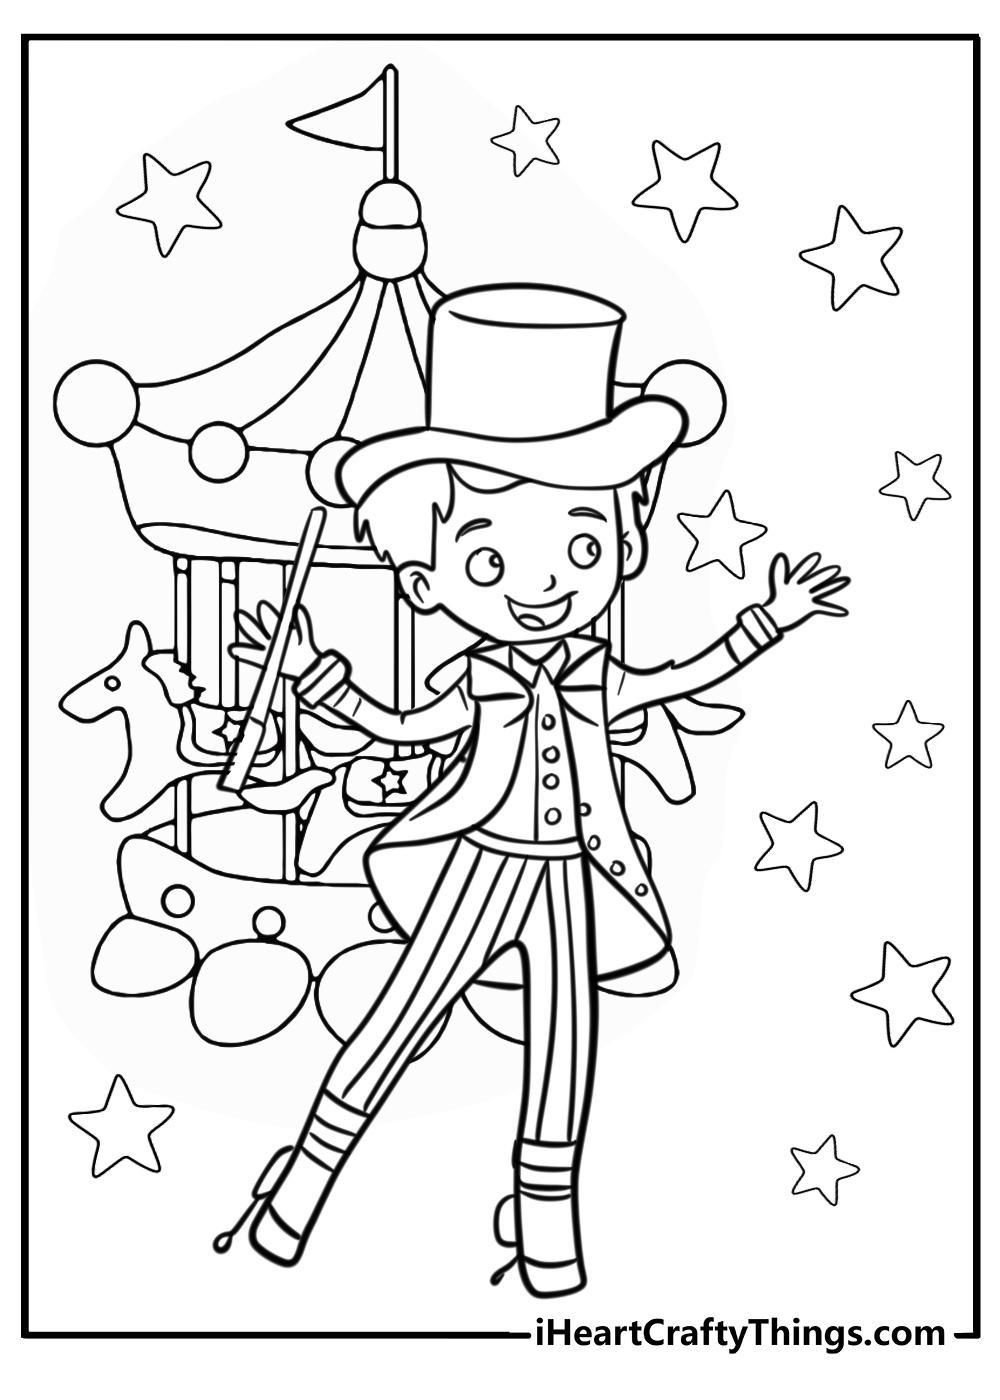 Simple circus coloring page show for preschoolers